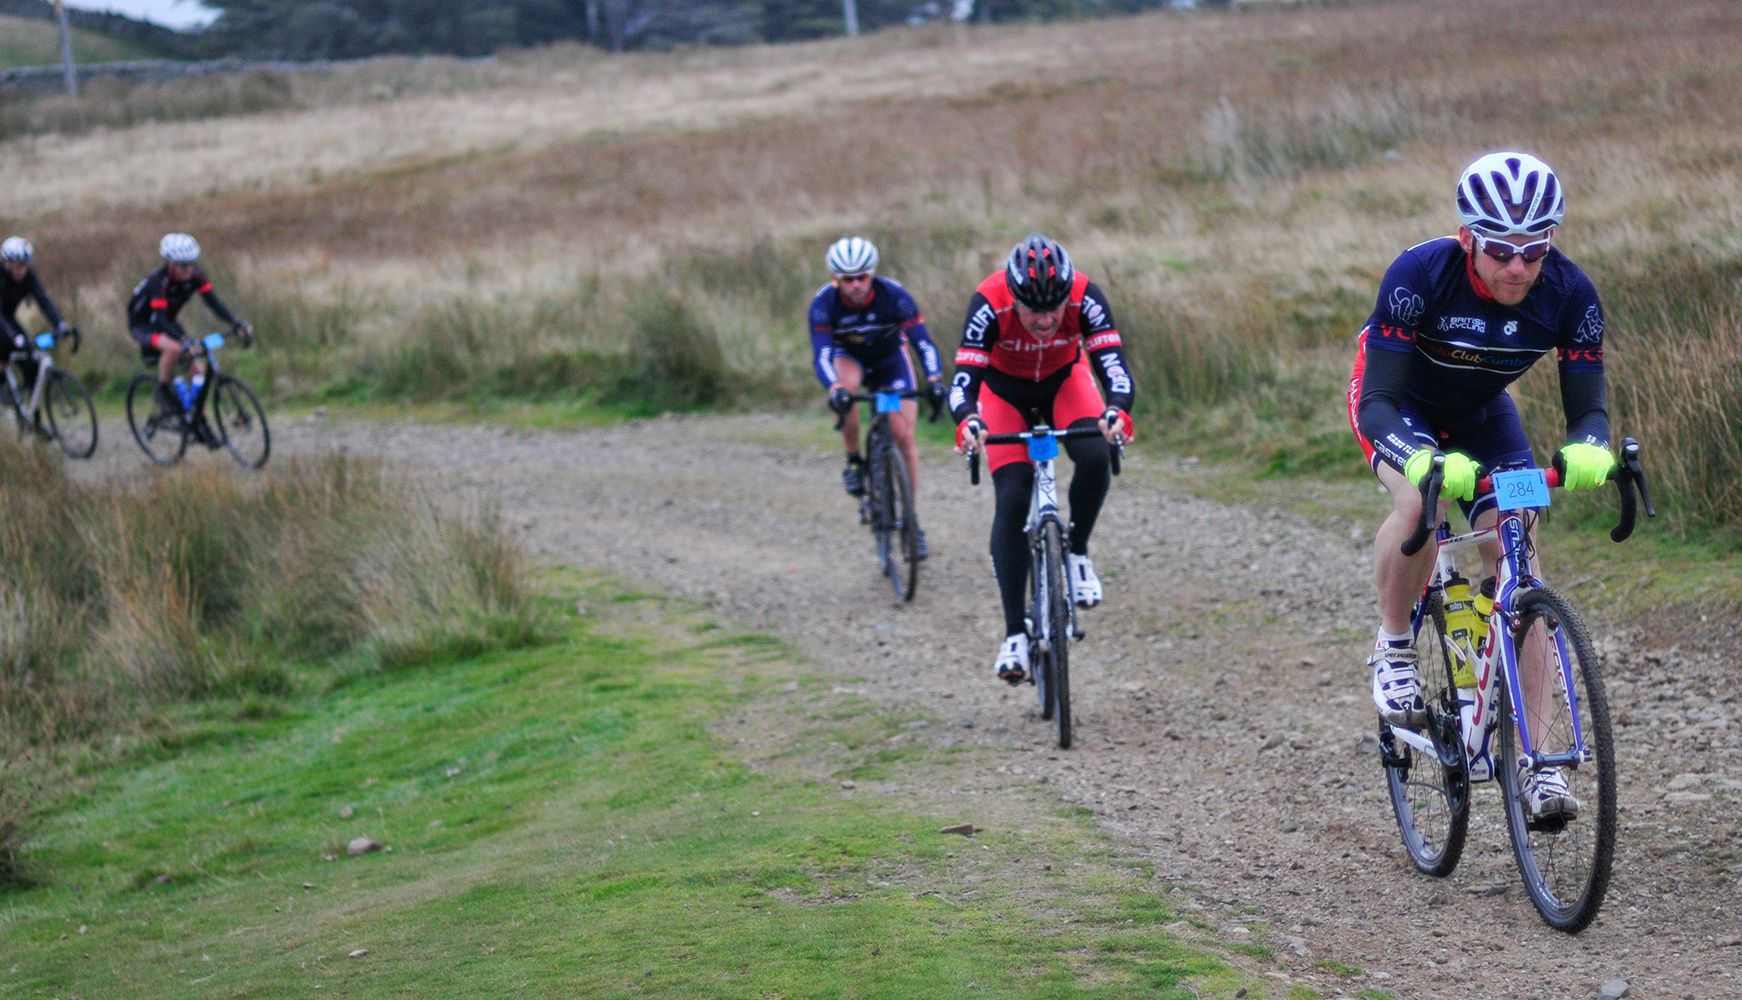 The Monster Miles is a 62 mile (55% off road) Cyclo-Cross Sportive in Cumbria organised by Cycling Weekly and run by Rather Be CyclingHere the leading riders are setting off over Caldbeck Commons from Calebreck on the Fellside Sector.